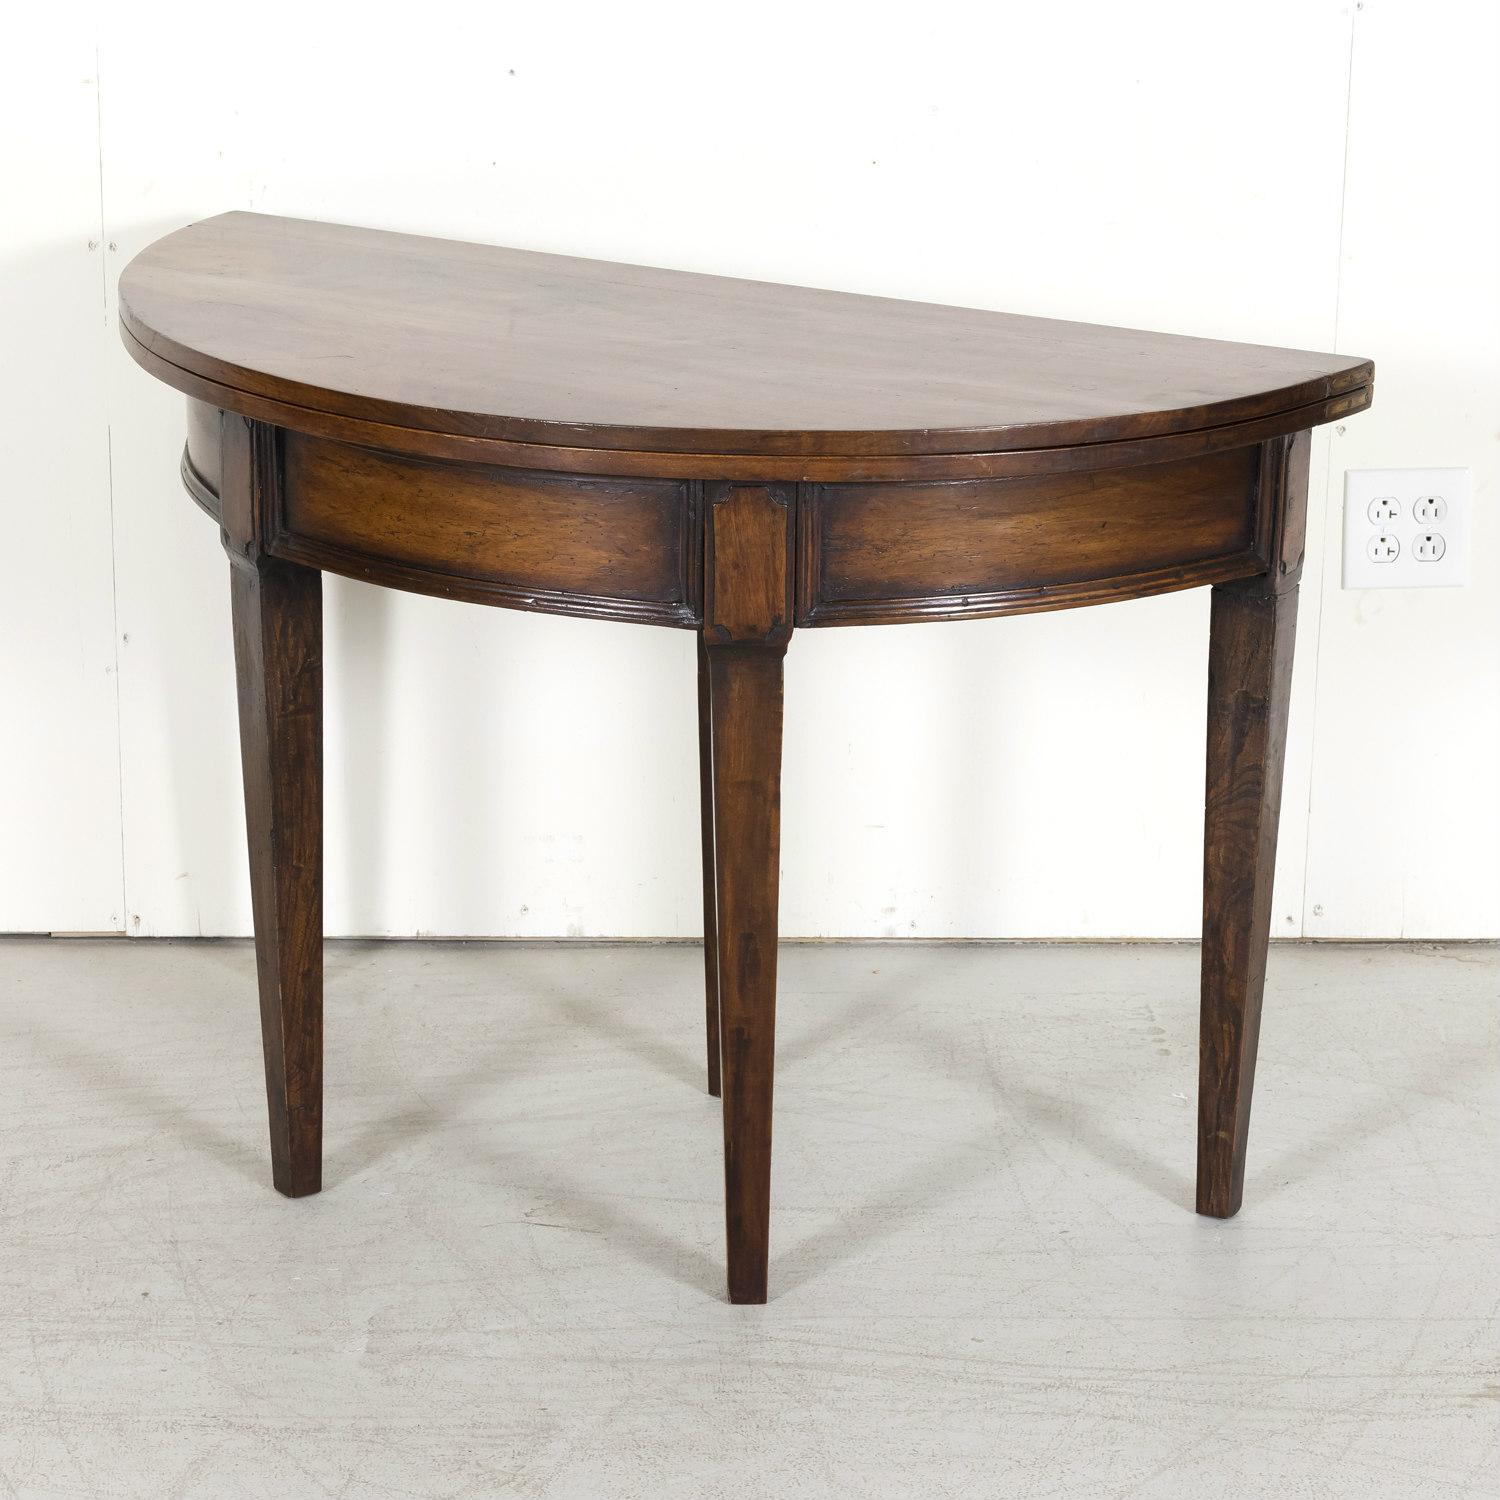 19th Century French Louis XVI Style Walnut Demilune Wall Console or Side Table For Sale 5